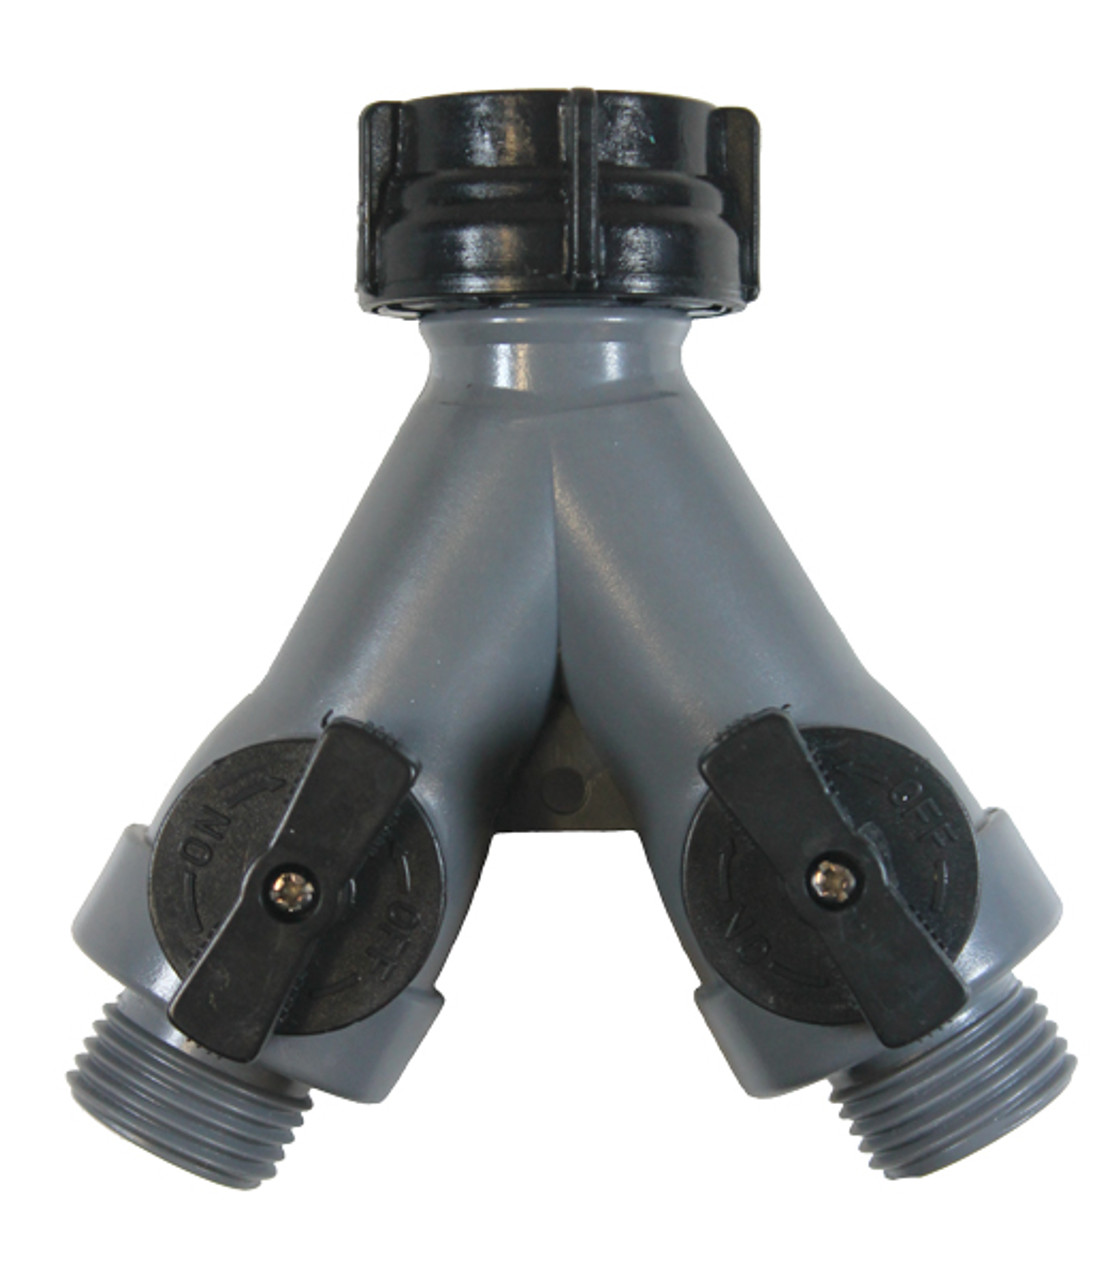 All about Garden Hose Fittings - DripWorks